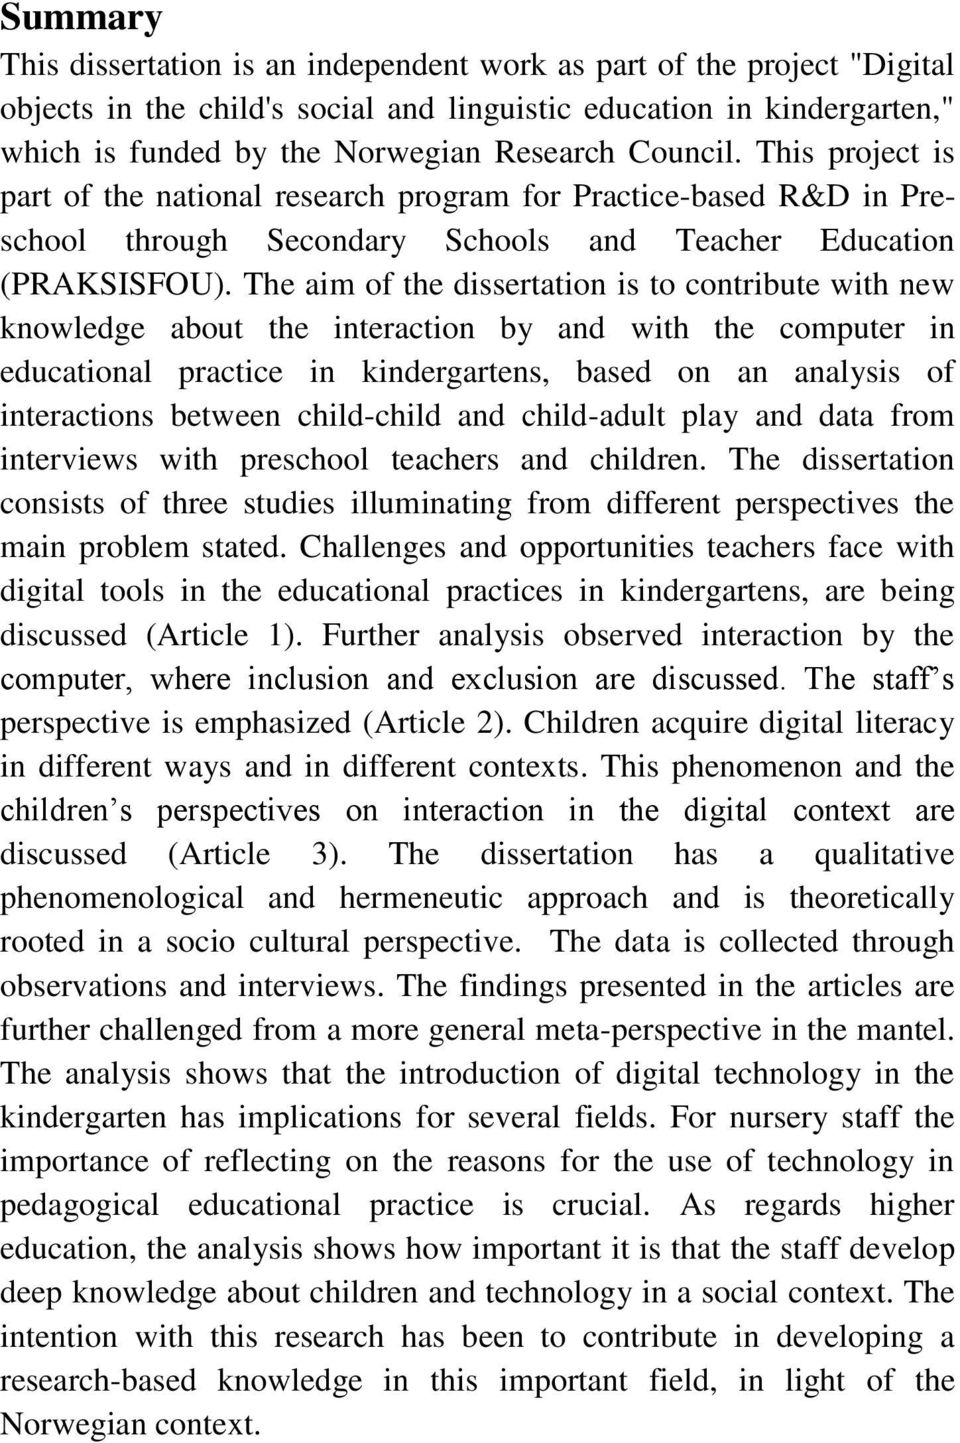 The aim of the dissertation is to contribute with new knowledge about the interaction by and with the computer in educational practice in kindergartens, based on an analysis of interactions between